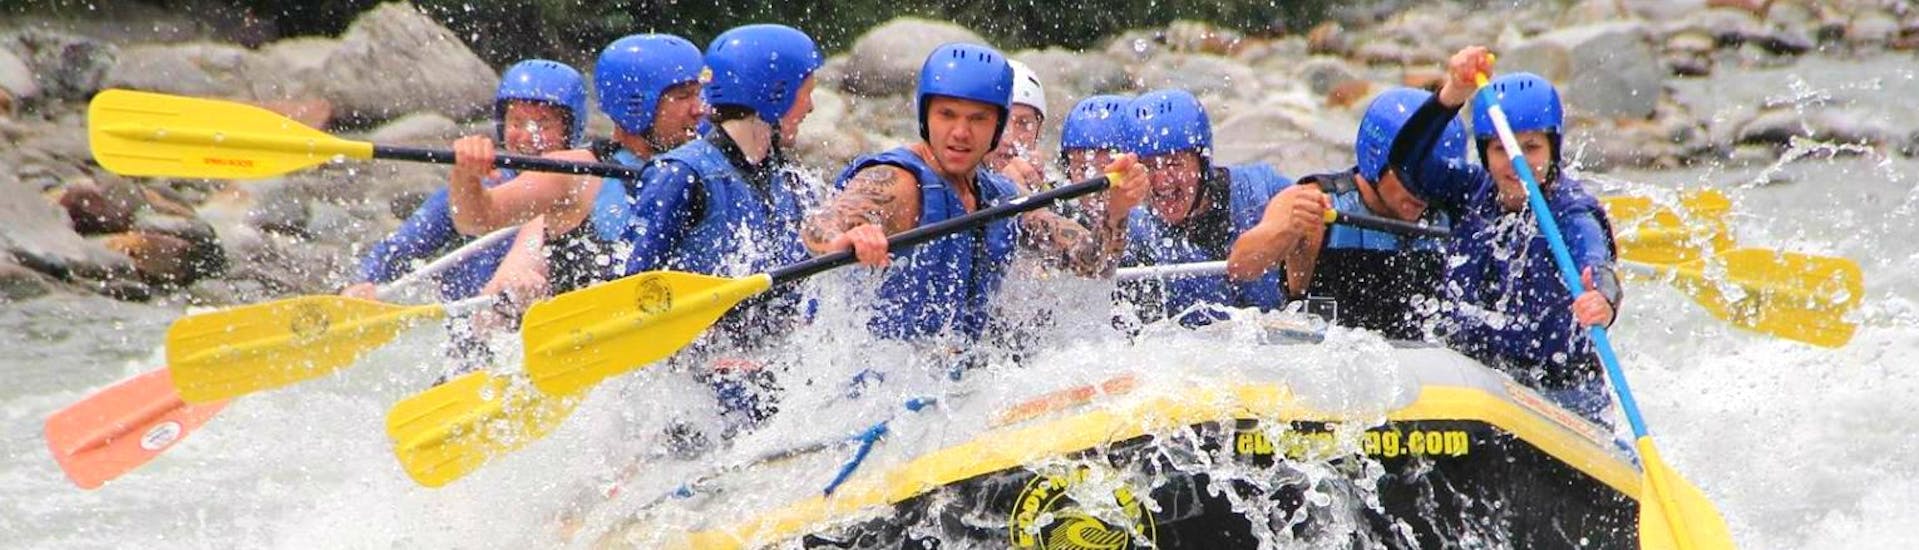 A rafting group proving true team spirit on their Rafting "Rodeo" Tour with Eddy Rafting on the Isel river.